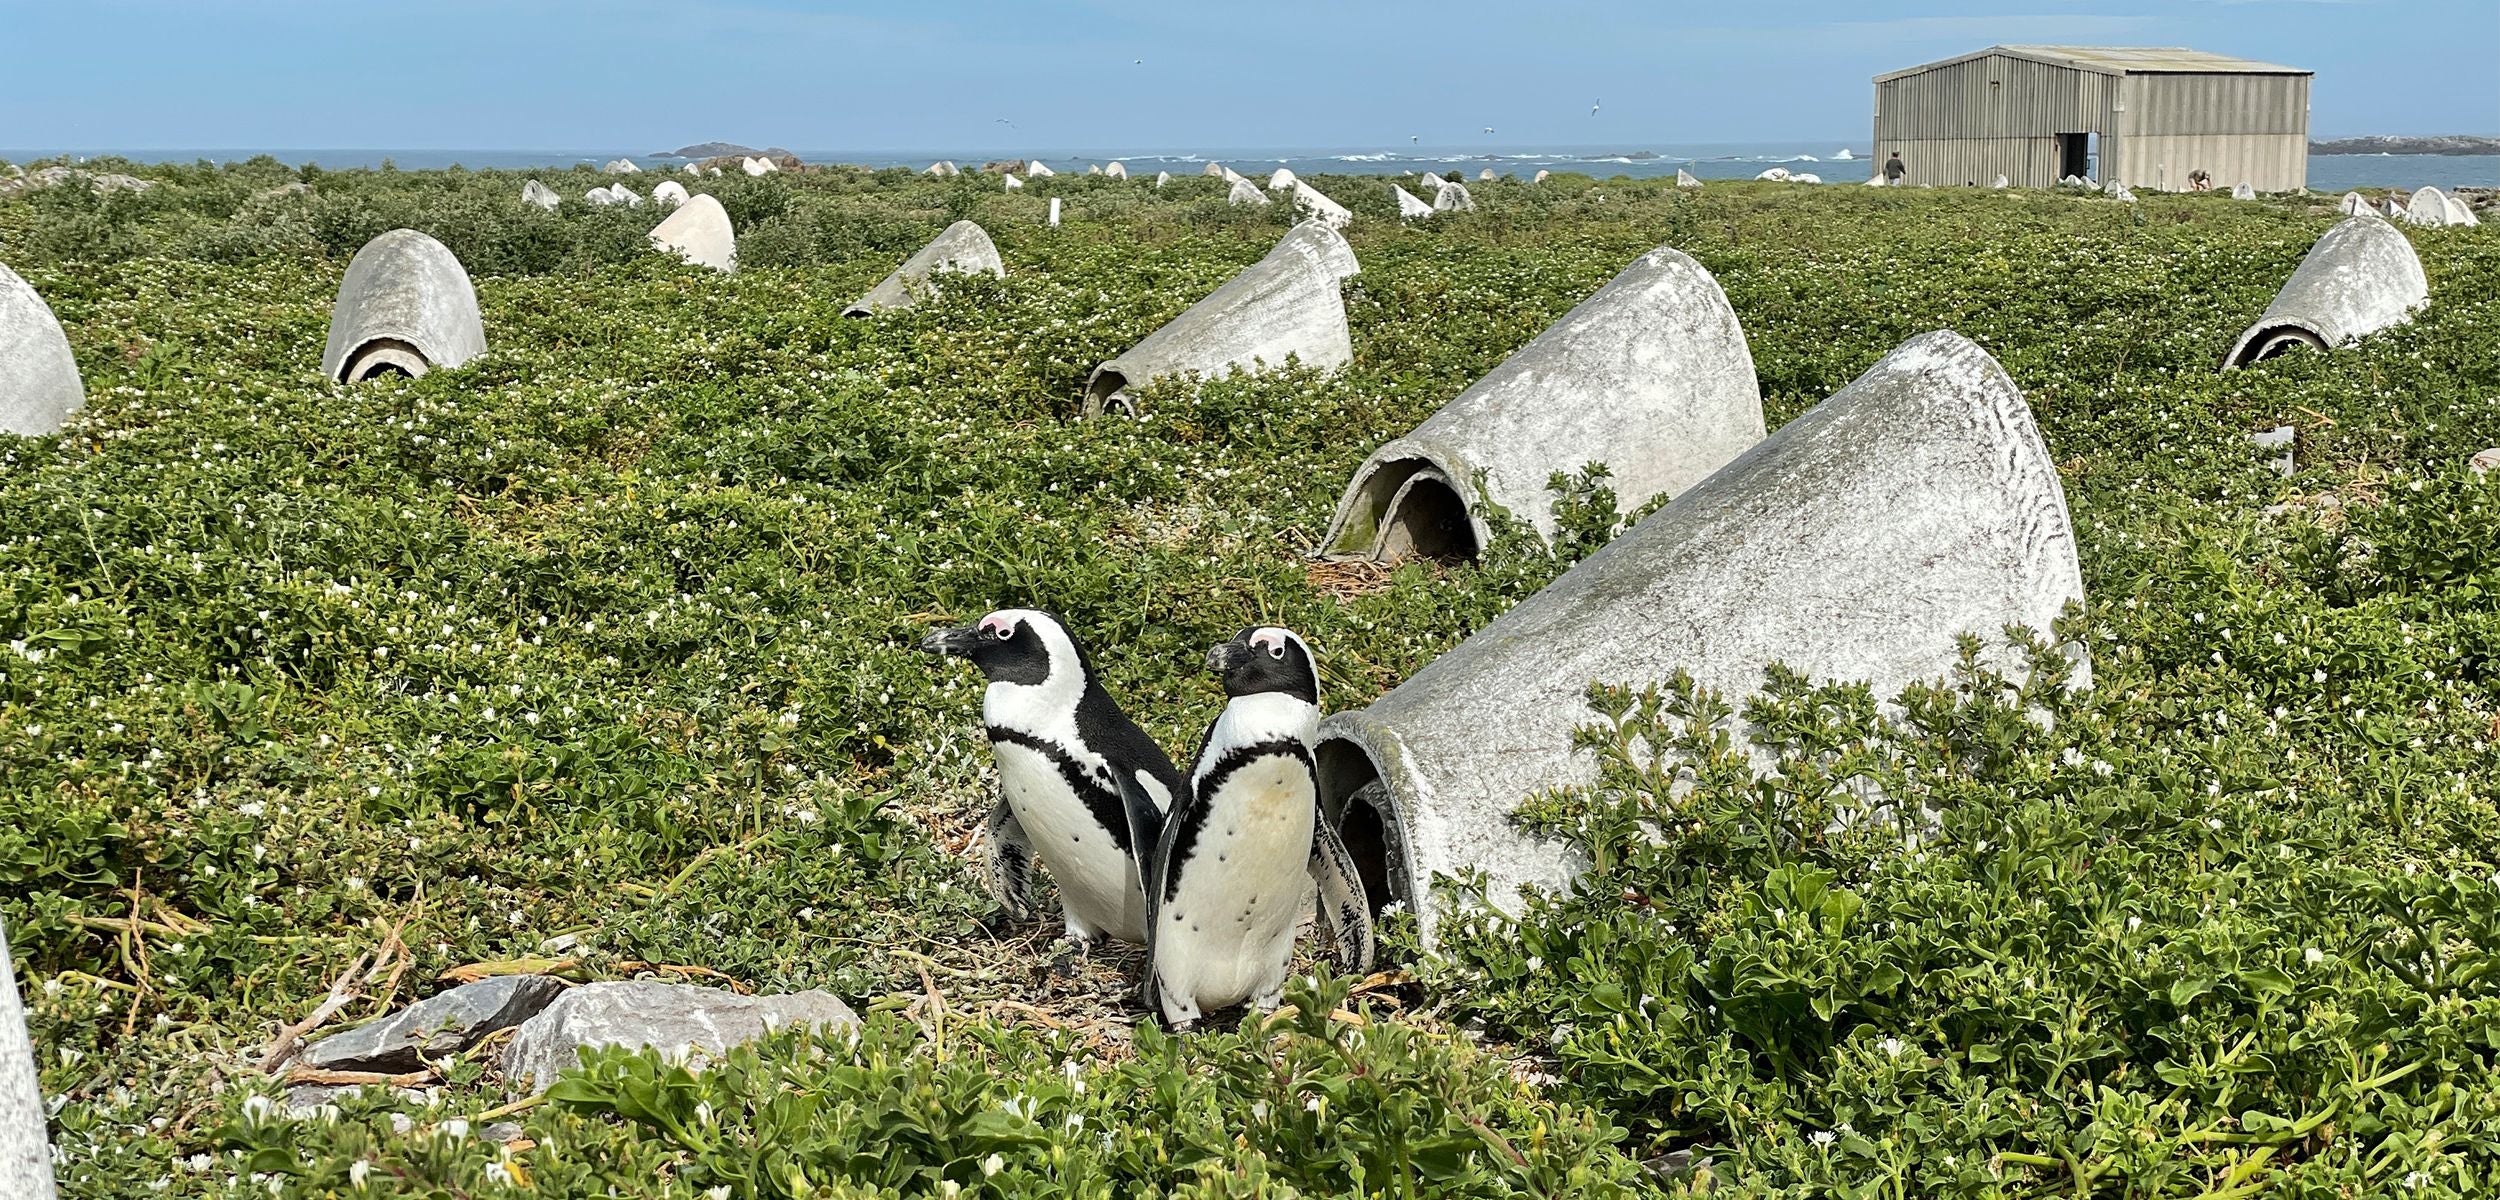 Ceramic ‘igloos’ could keep African penguins cool and cozy